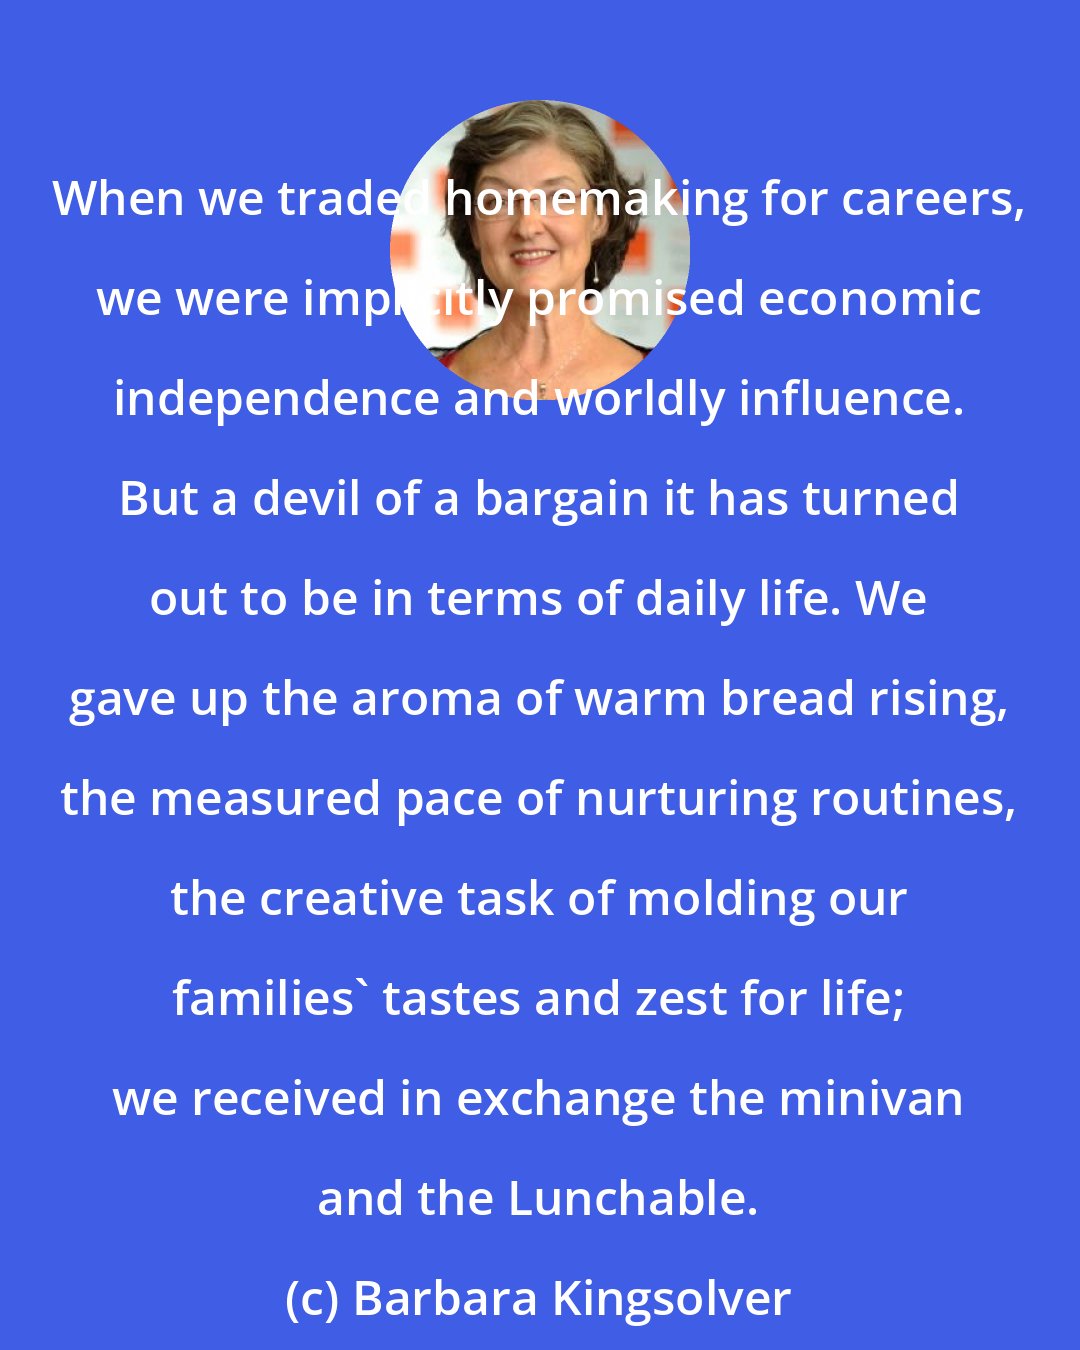 Barbara Kingsolver: When we traded homemaking for careers, we were implicitly promised economic independence and worldly influence. But a devil of a bargain it has turned out to be in terms of daily life. We gave up the aroma of warm bread rising, the measured pace of nurturing routines, the creative task of molding our families' tastes and zest for life; we received in exchange the minivan and the Lunchable.